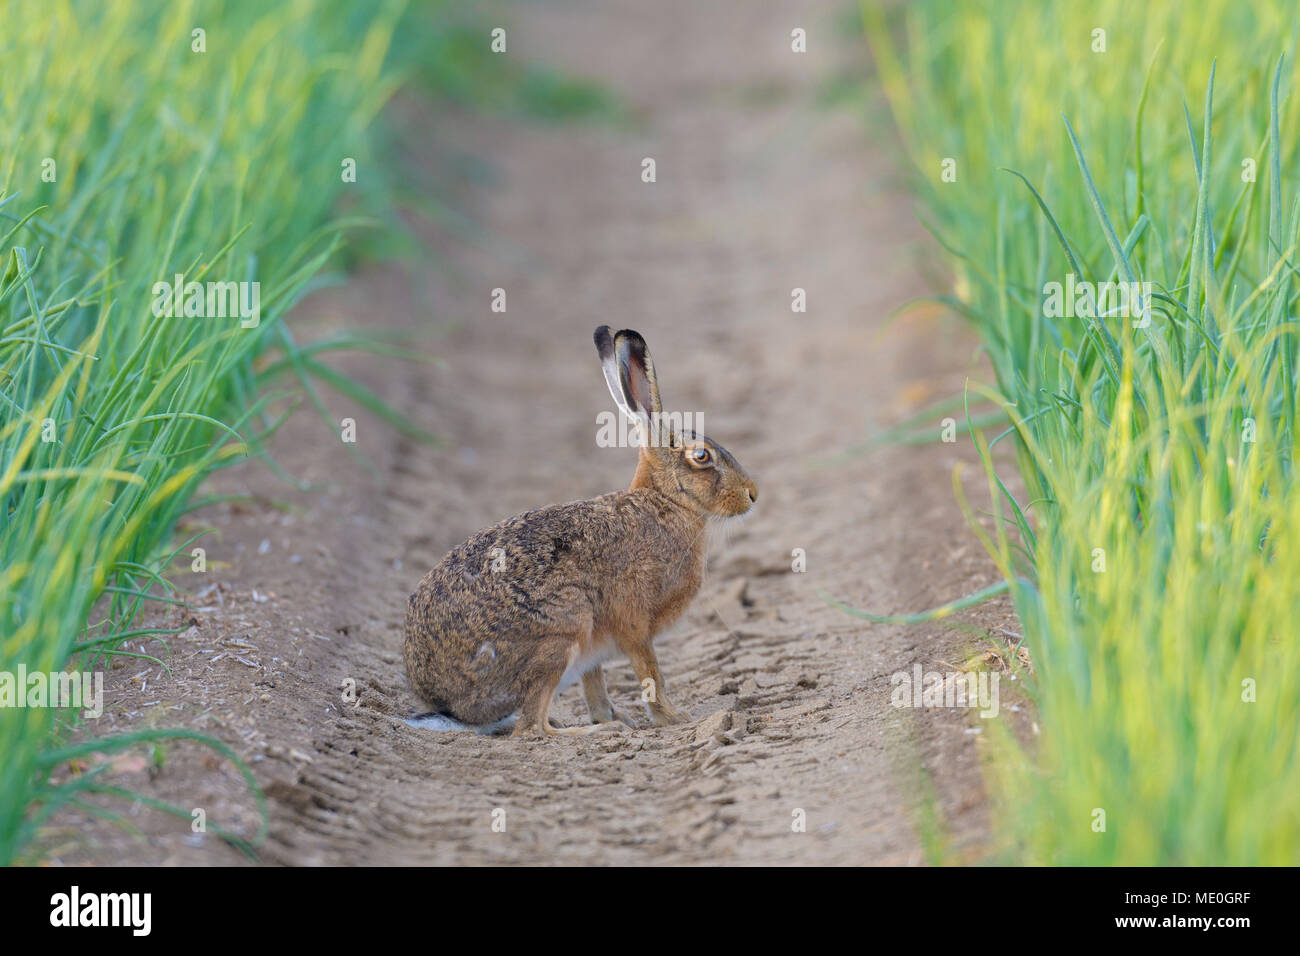 Profile portrait of a European brown hare (Lepus europaeus) sitting in a furrow of an onion field in Hesse, Germany Stock Photo